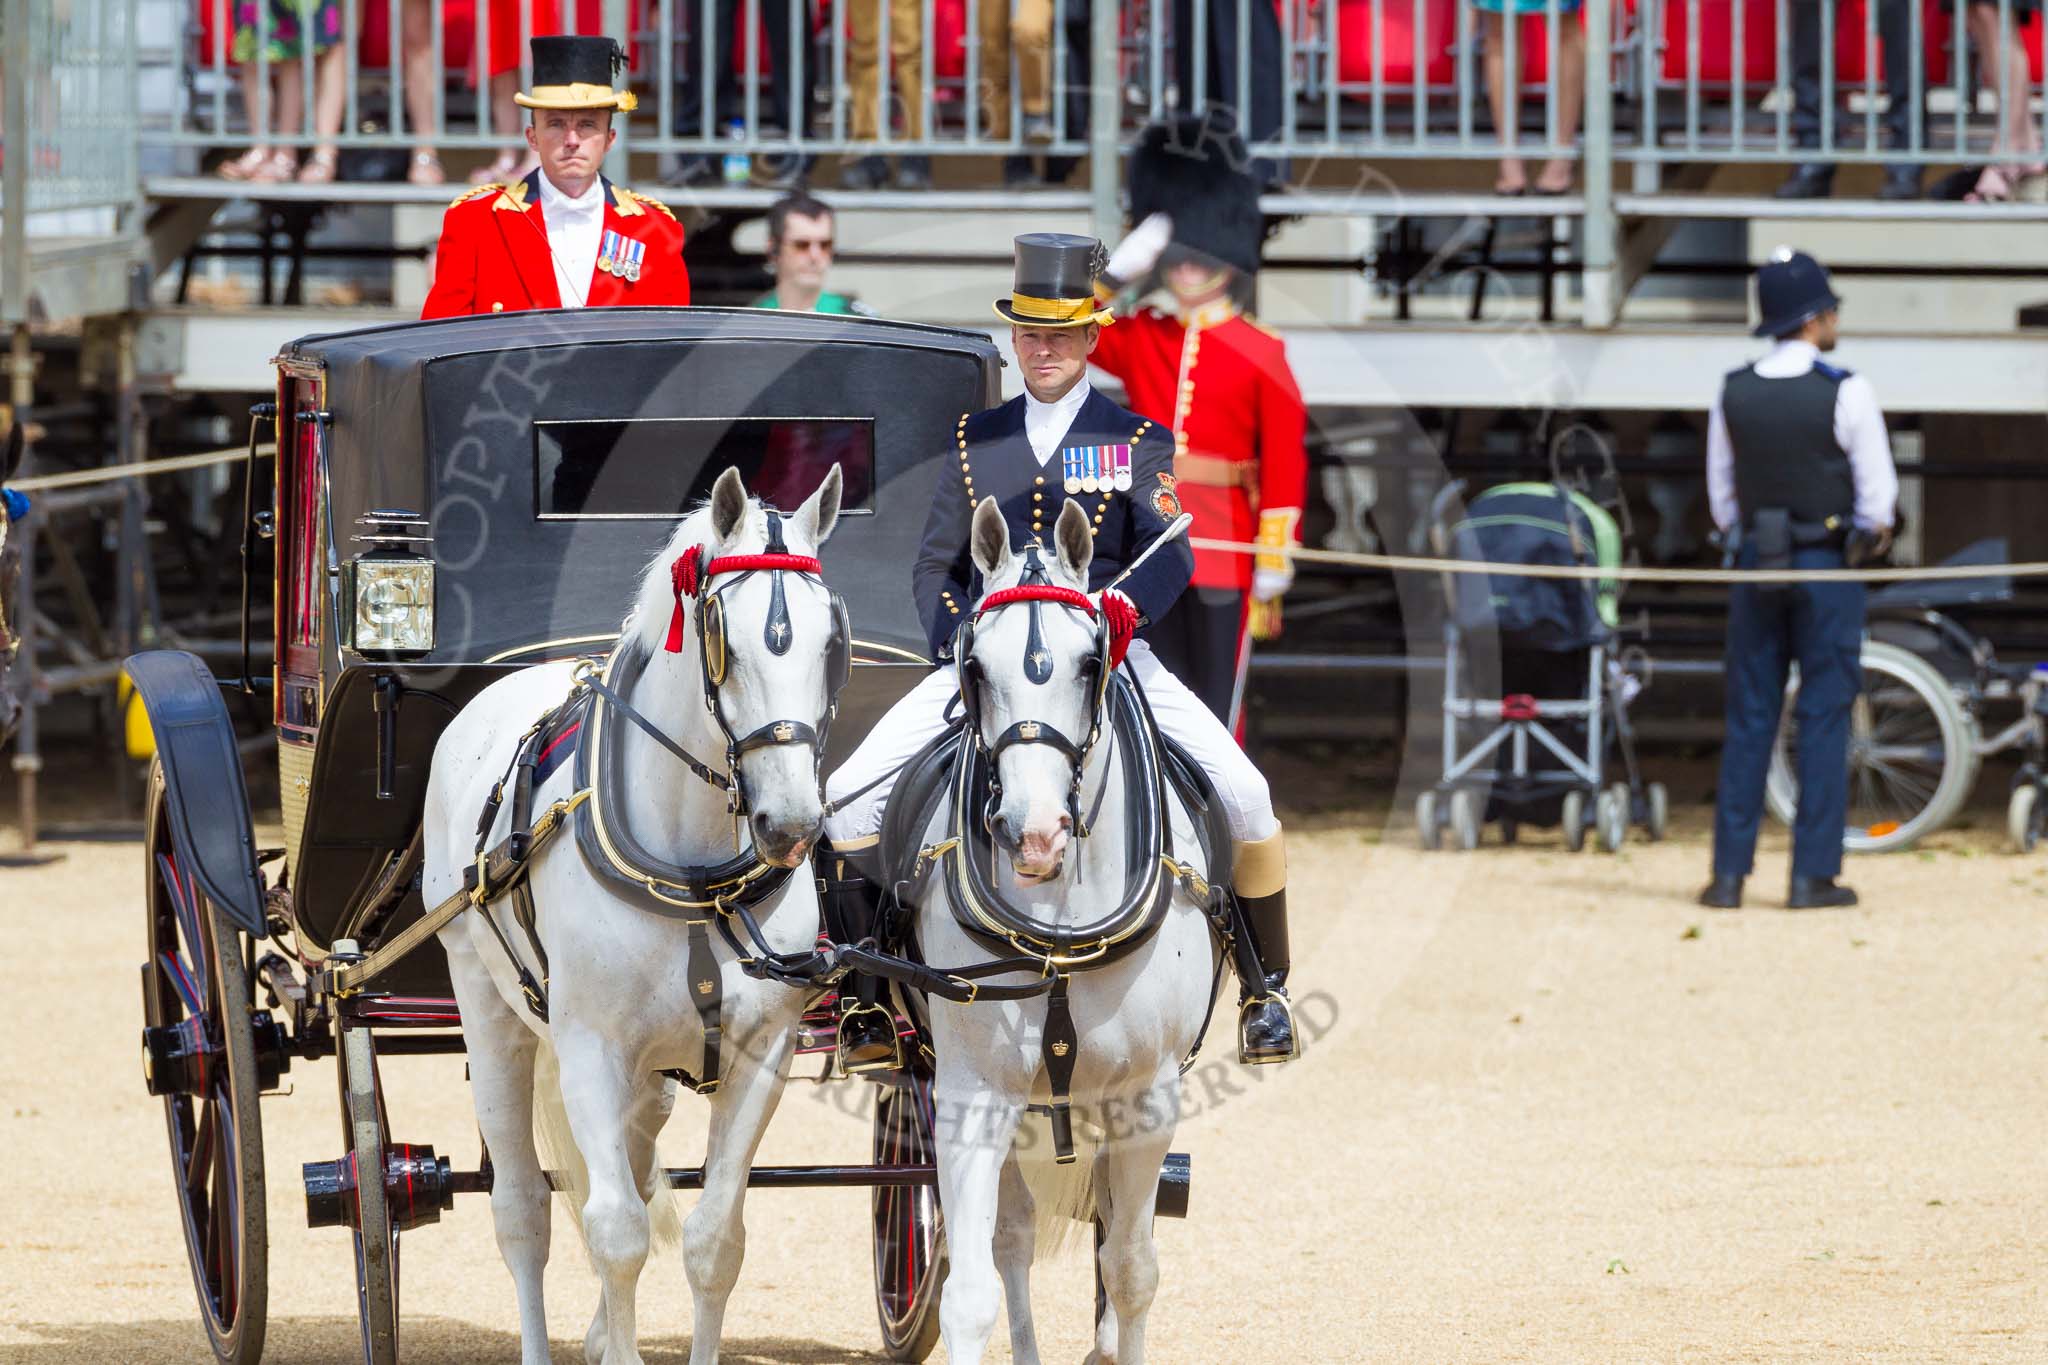 The Colonel's Review 2015.
Horse Guards Parade, Westminster,
London,

United Kingdom,
on 06 June 2015 at 10:59, image #186